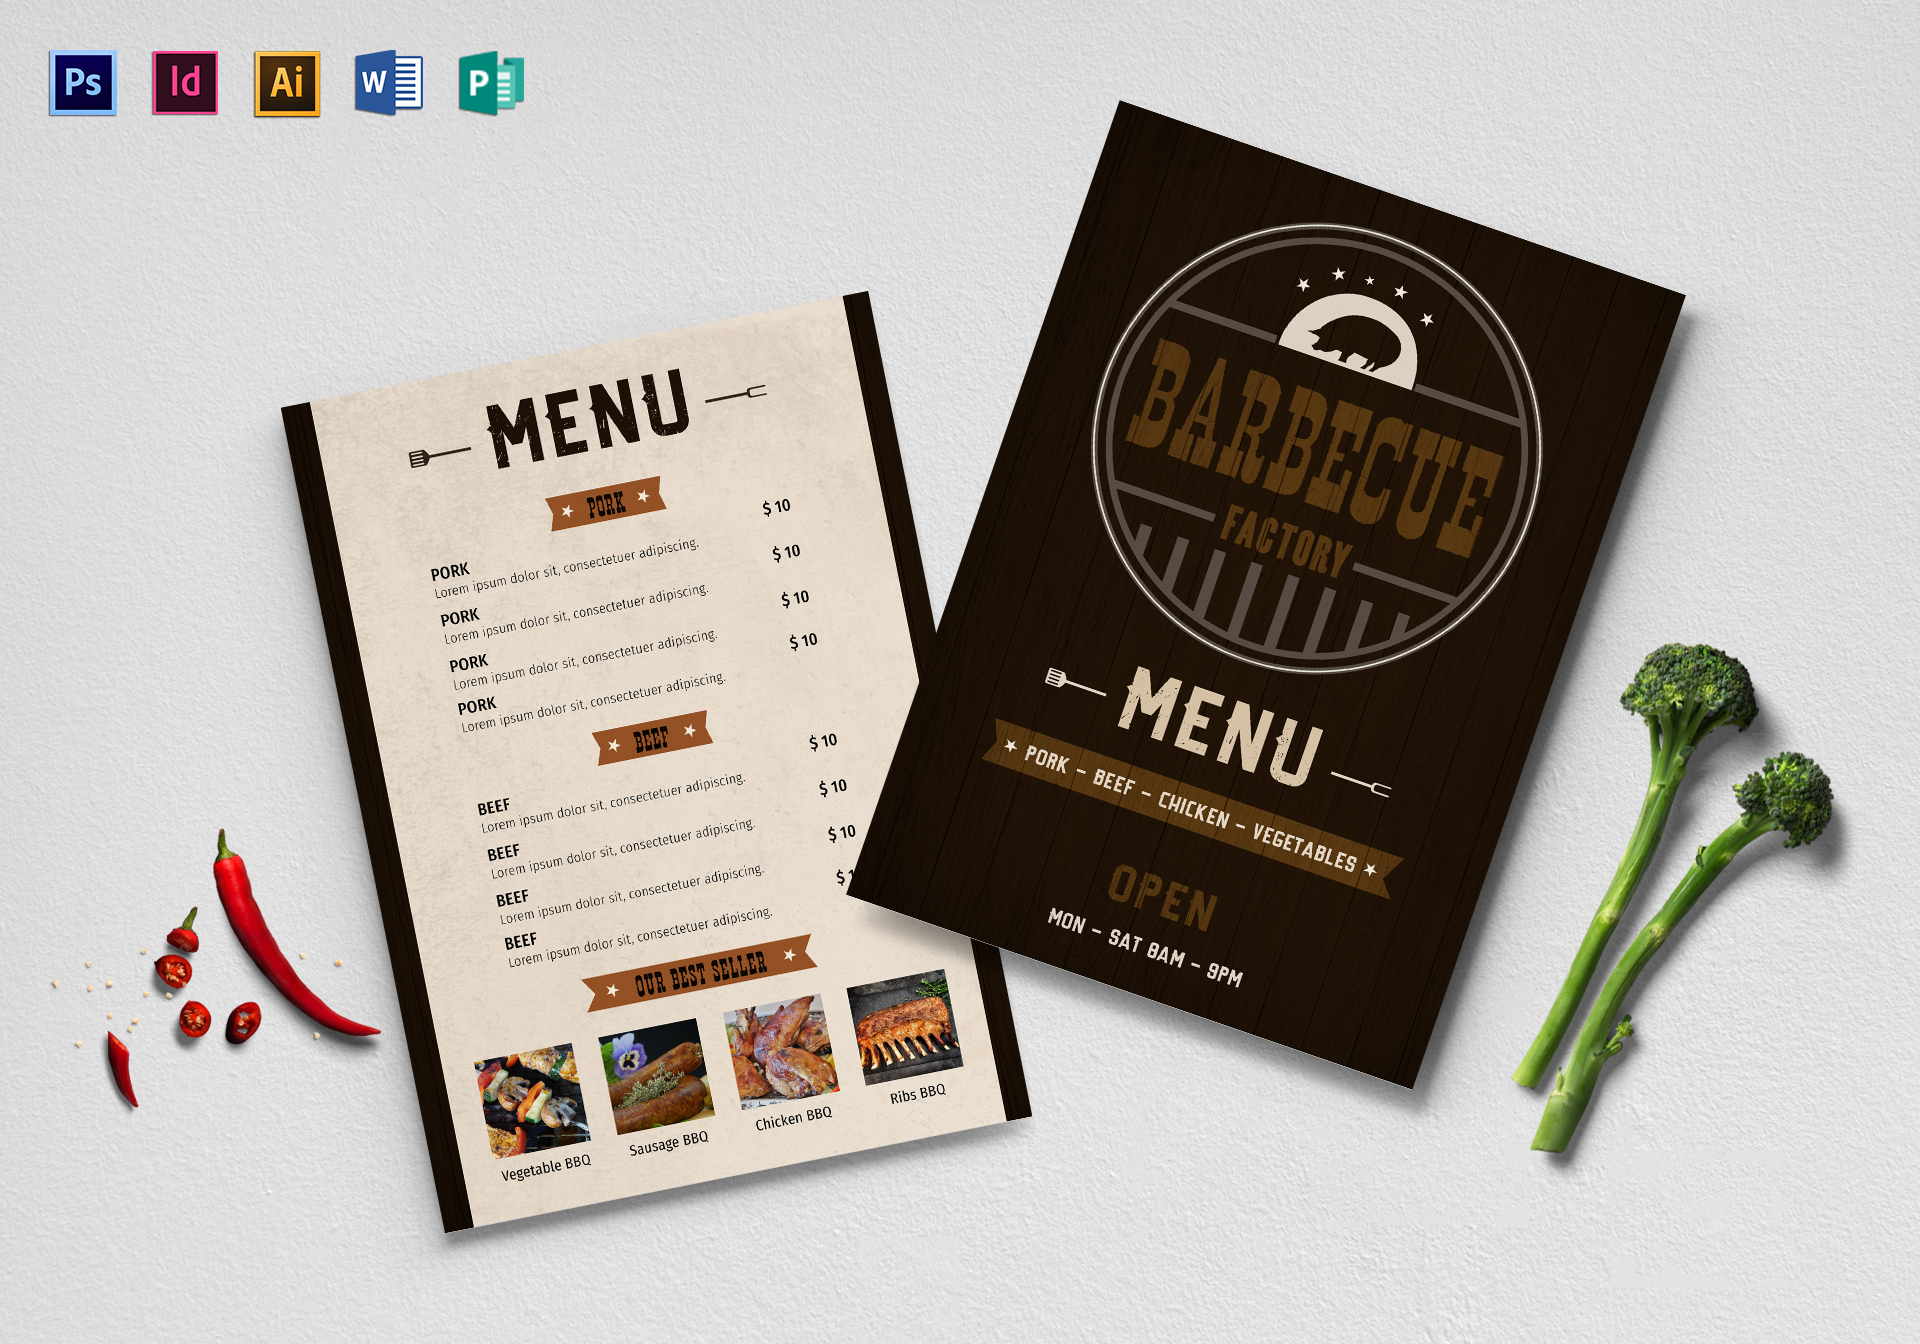 Bbq Menu Design Template In Psd, Word, Publisher, Illustrator, Indesign pertaining to Menu Templates For Publisher